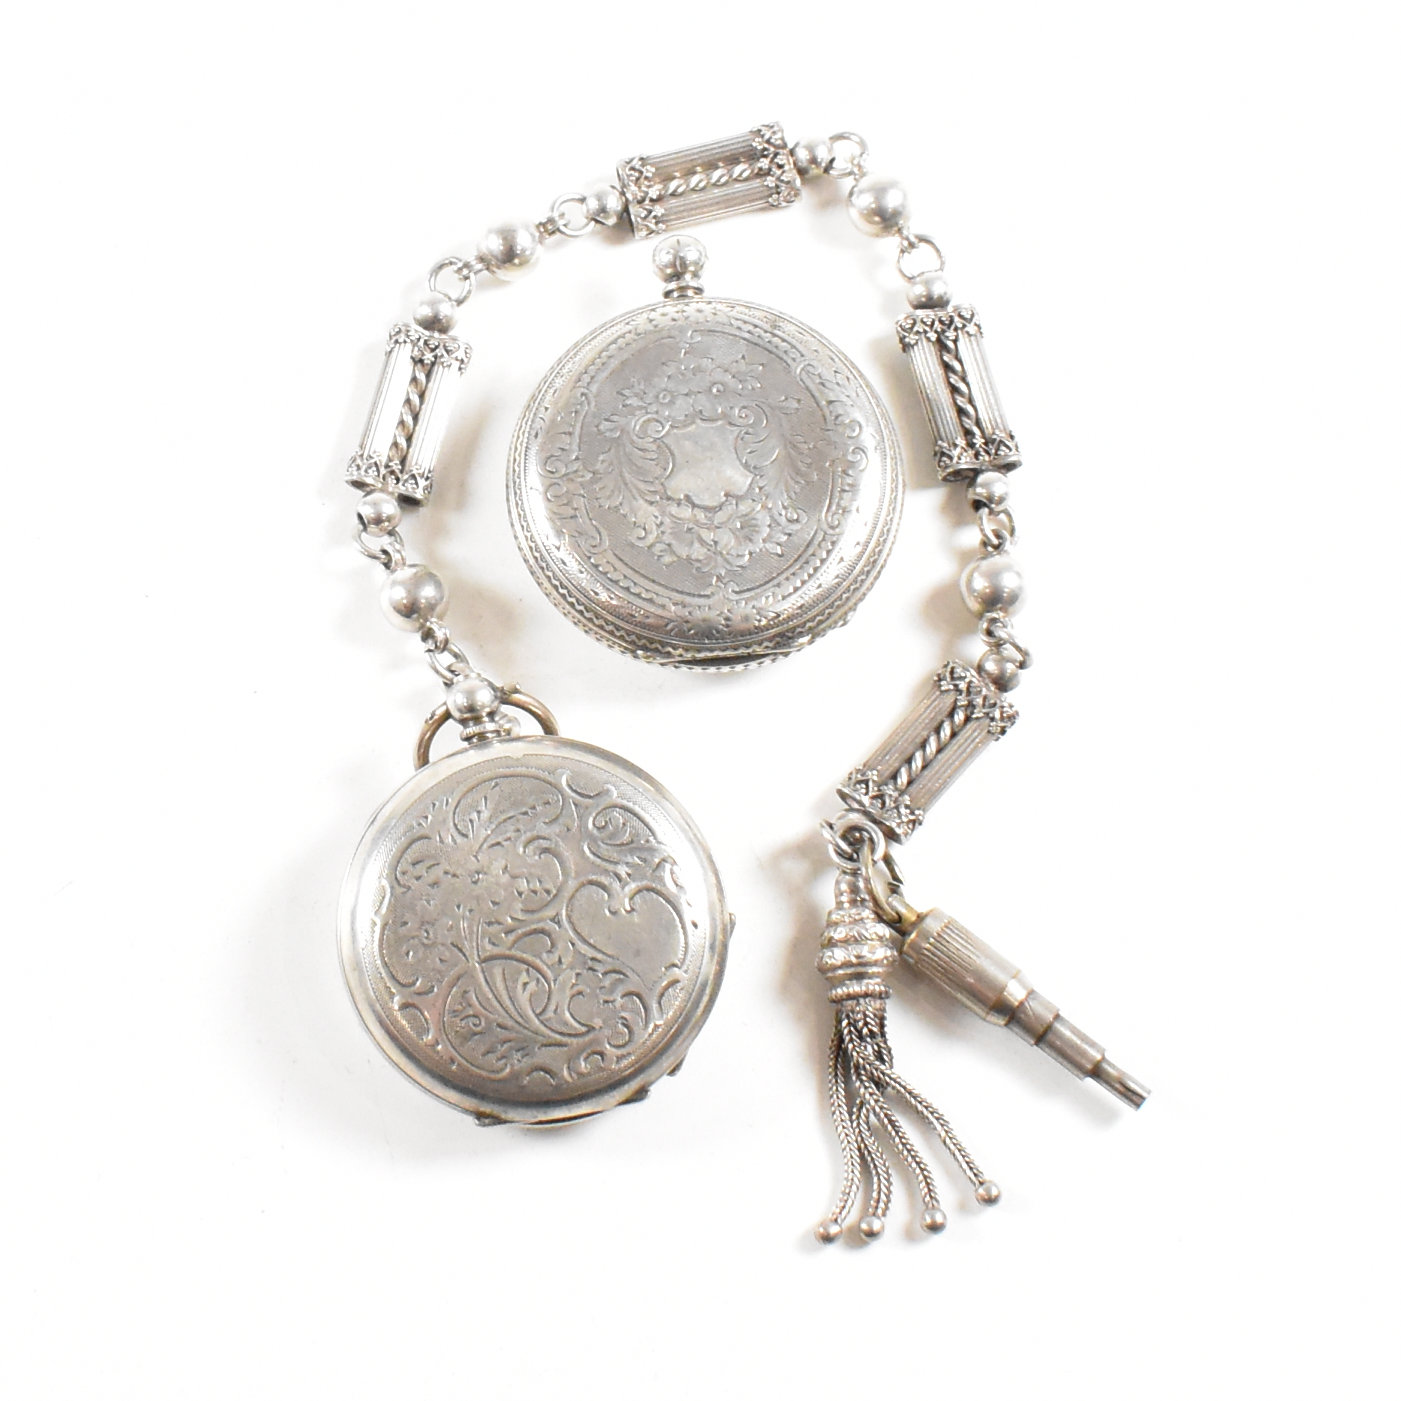 ANTIQUE FINE & 800 SILVER POCKET WATCHES & WHITE METAL ALBERTINE CHAIN - Image 9 of 10